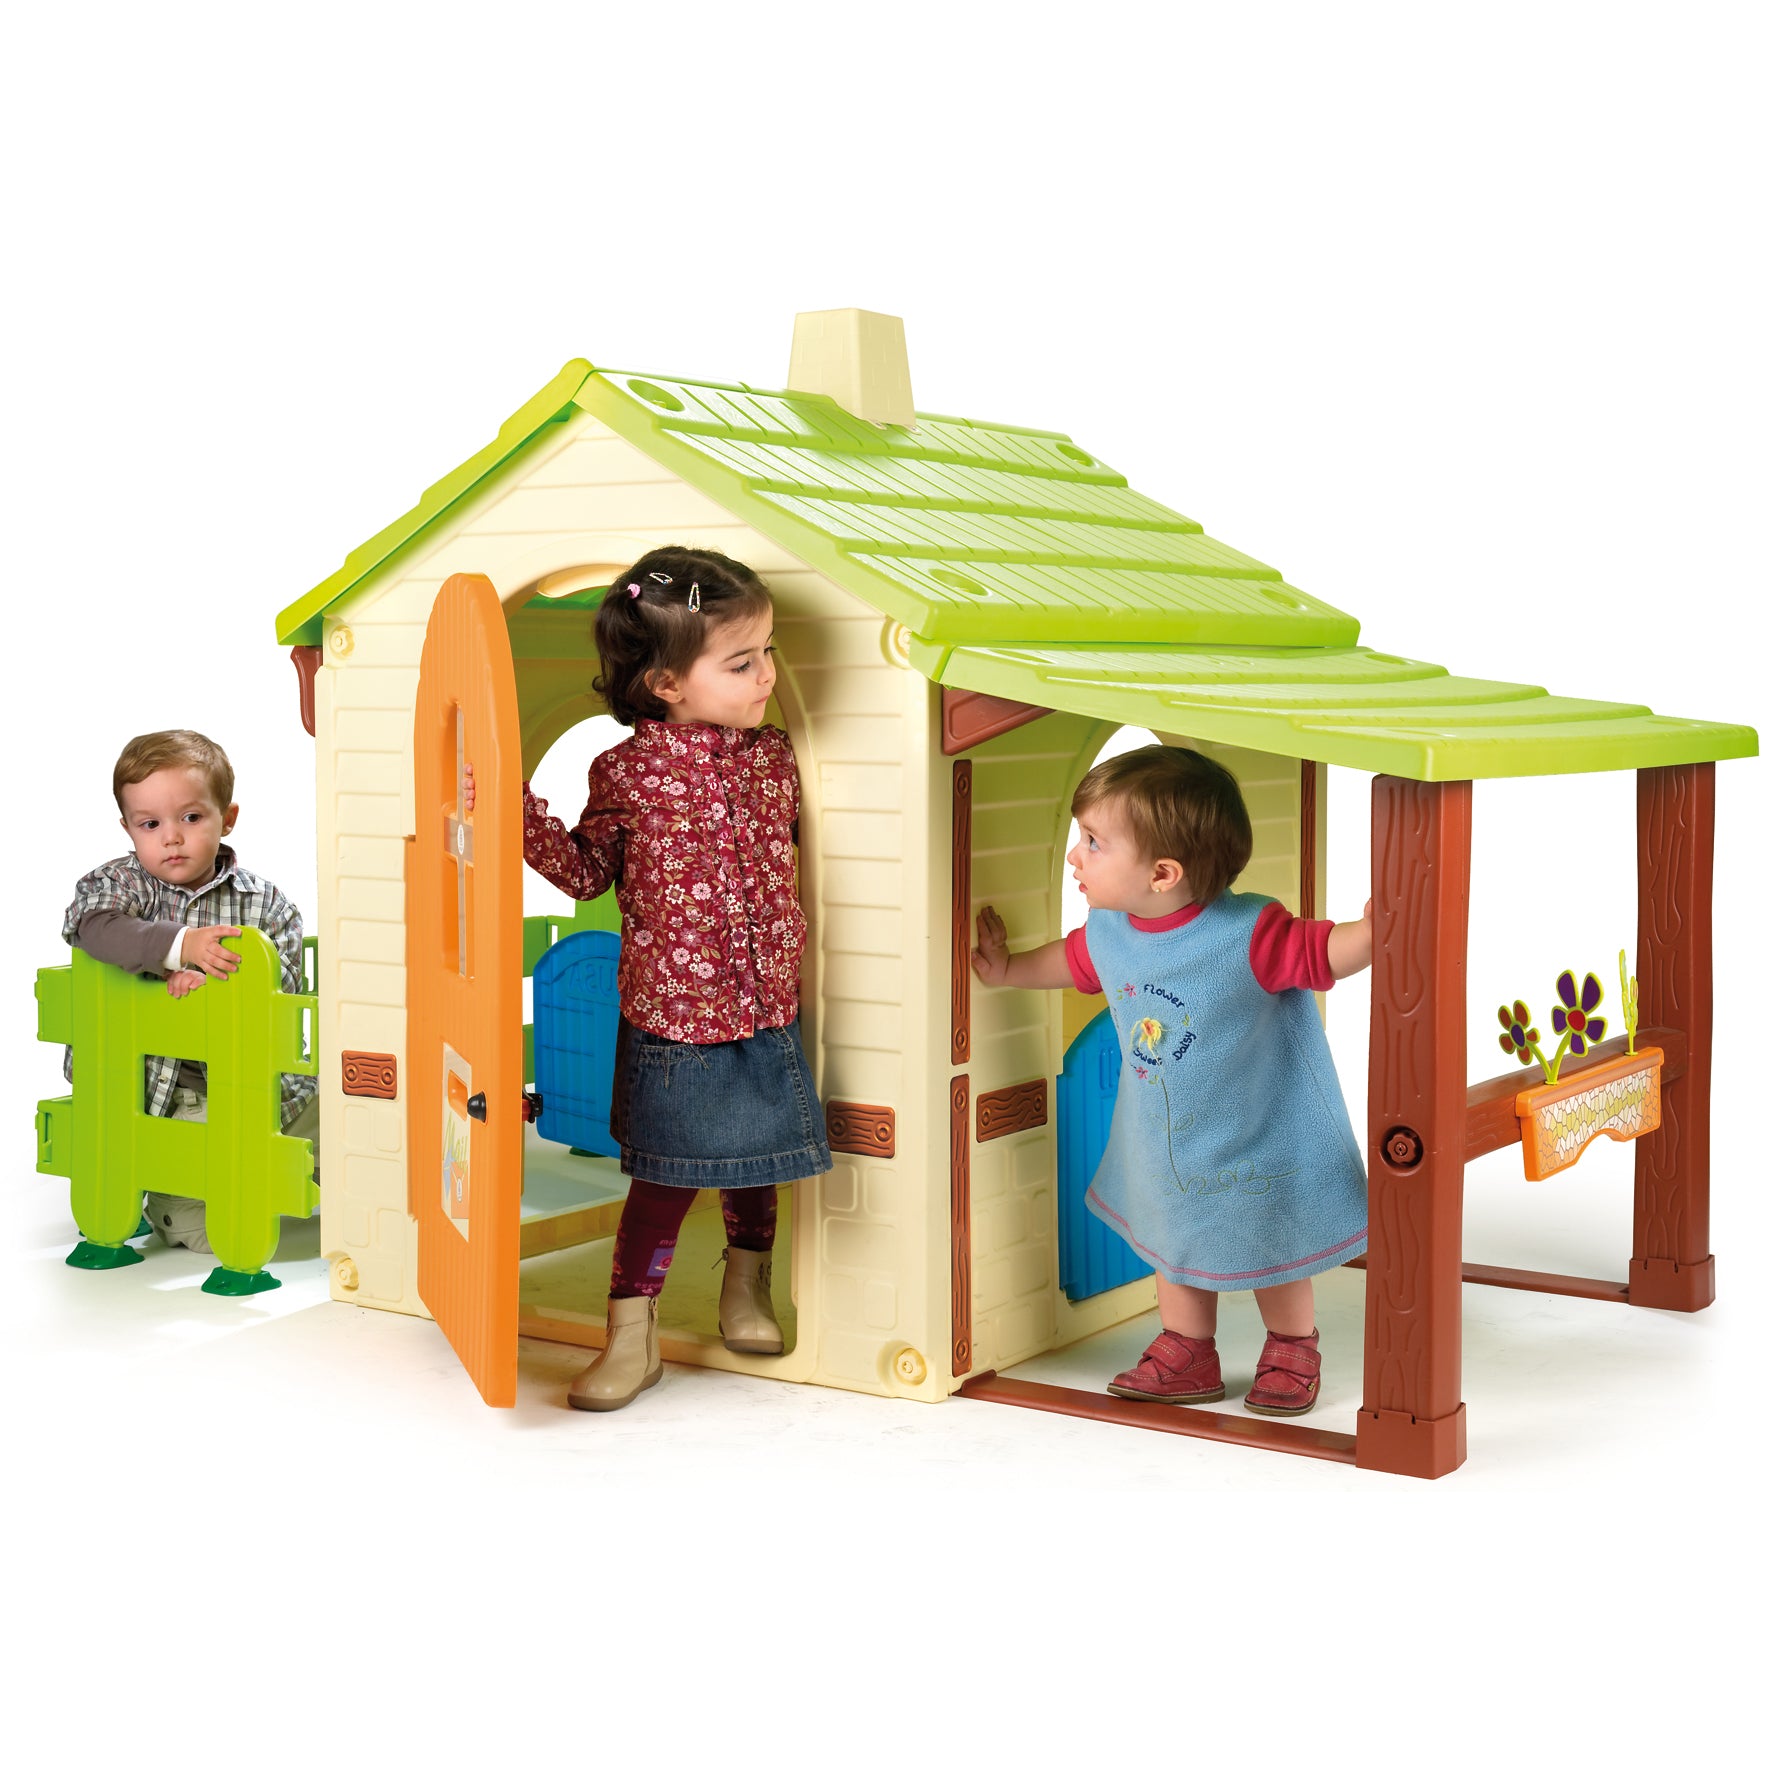 Studio image of the Country Playhouse with children playing.